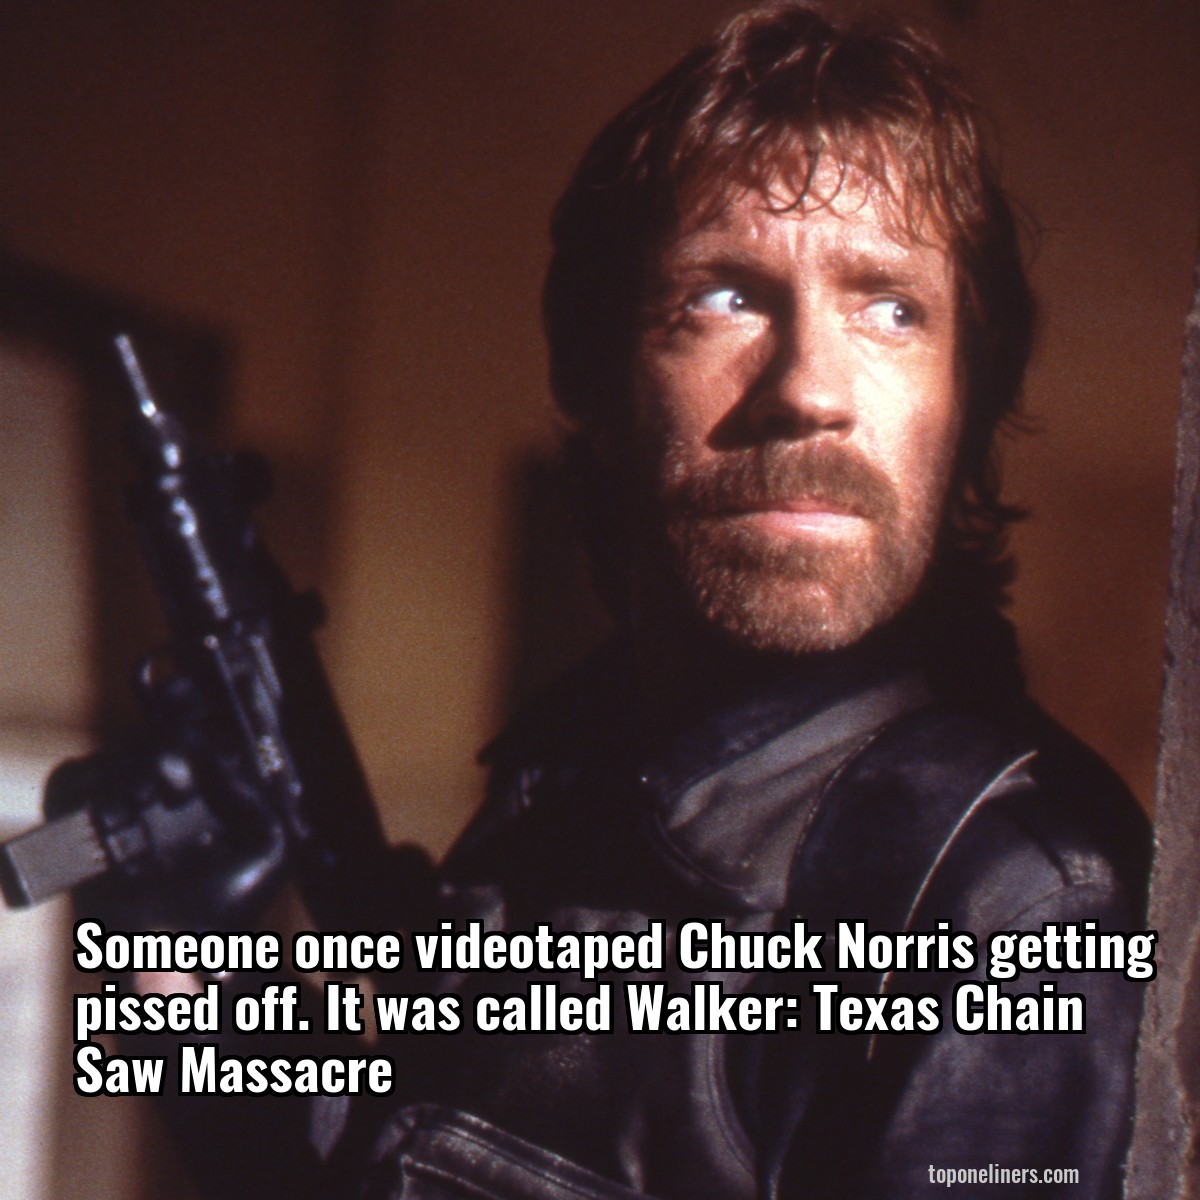 Someone once videotaped Chuck Norris getting pissed off. It was called Walker: Texas Chain Saw Massacre